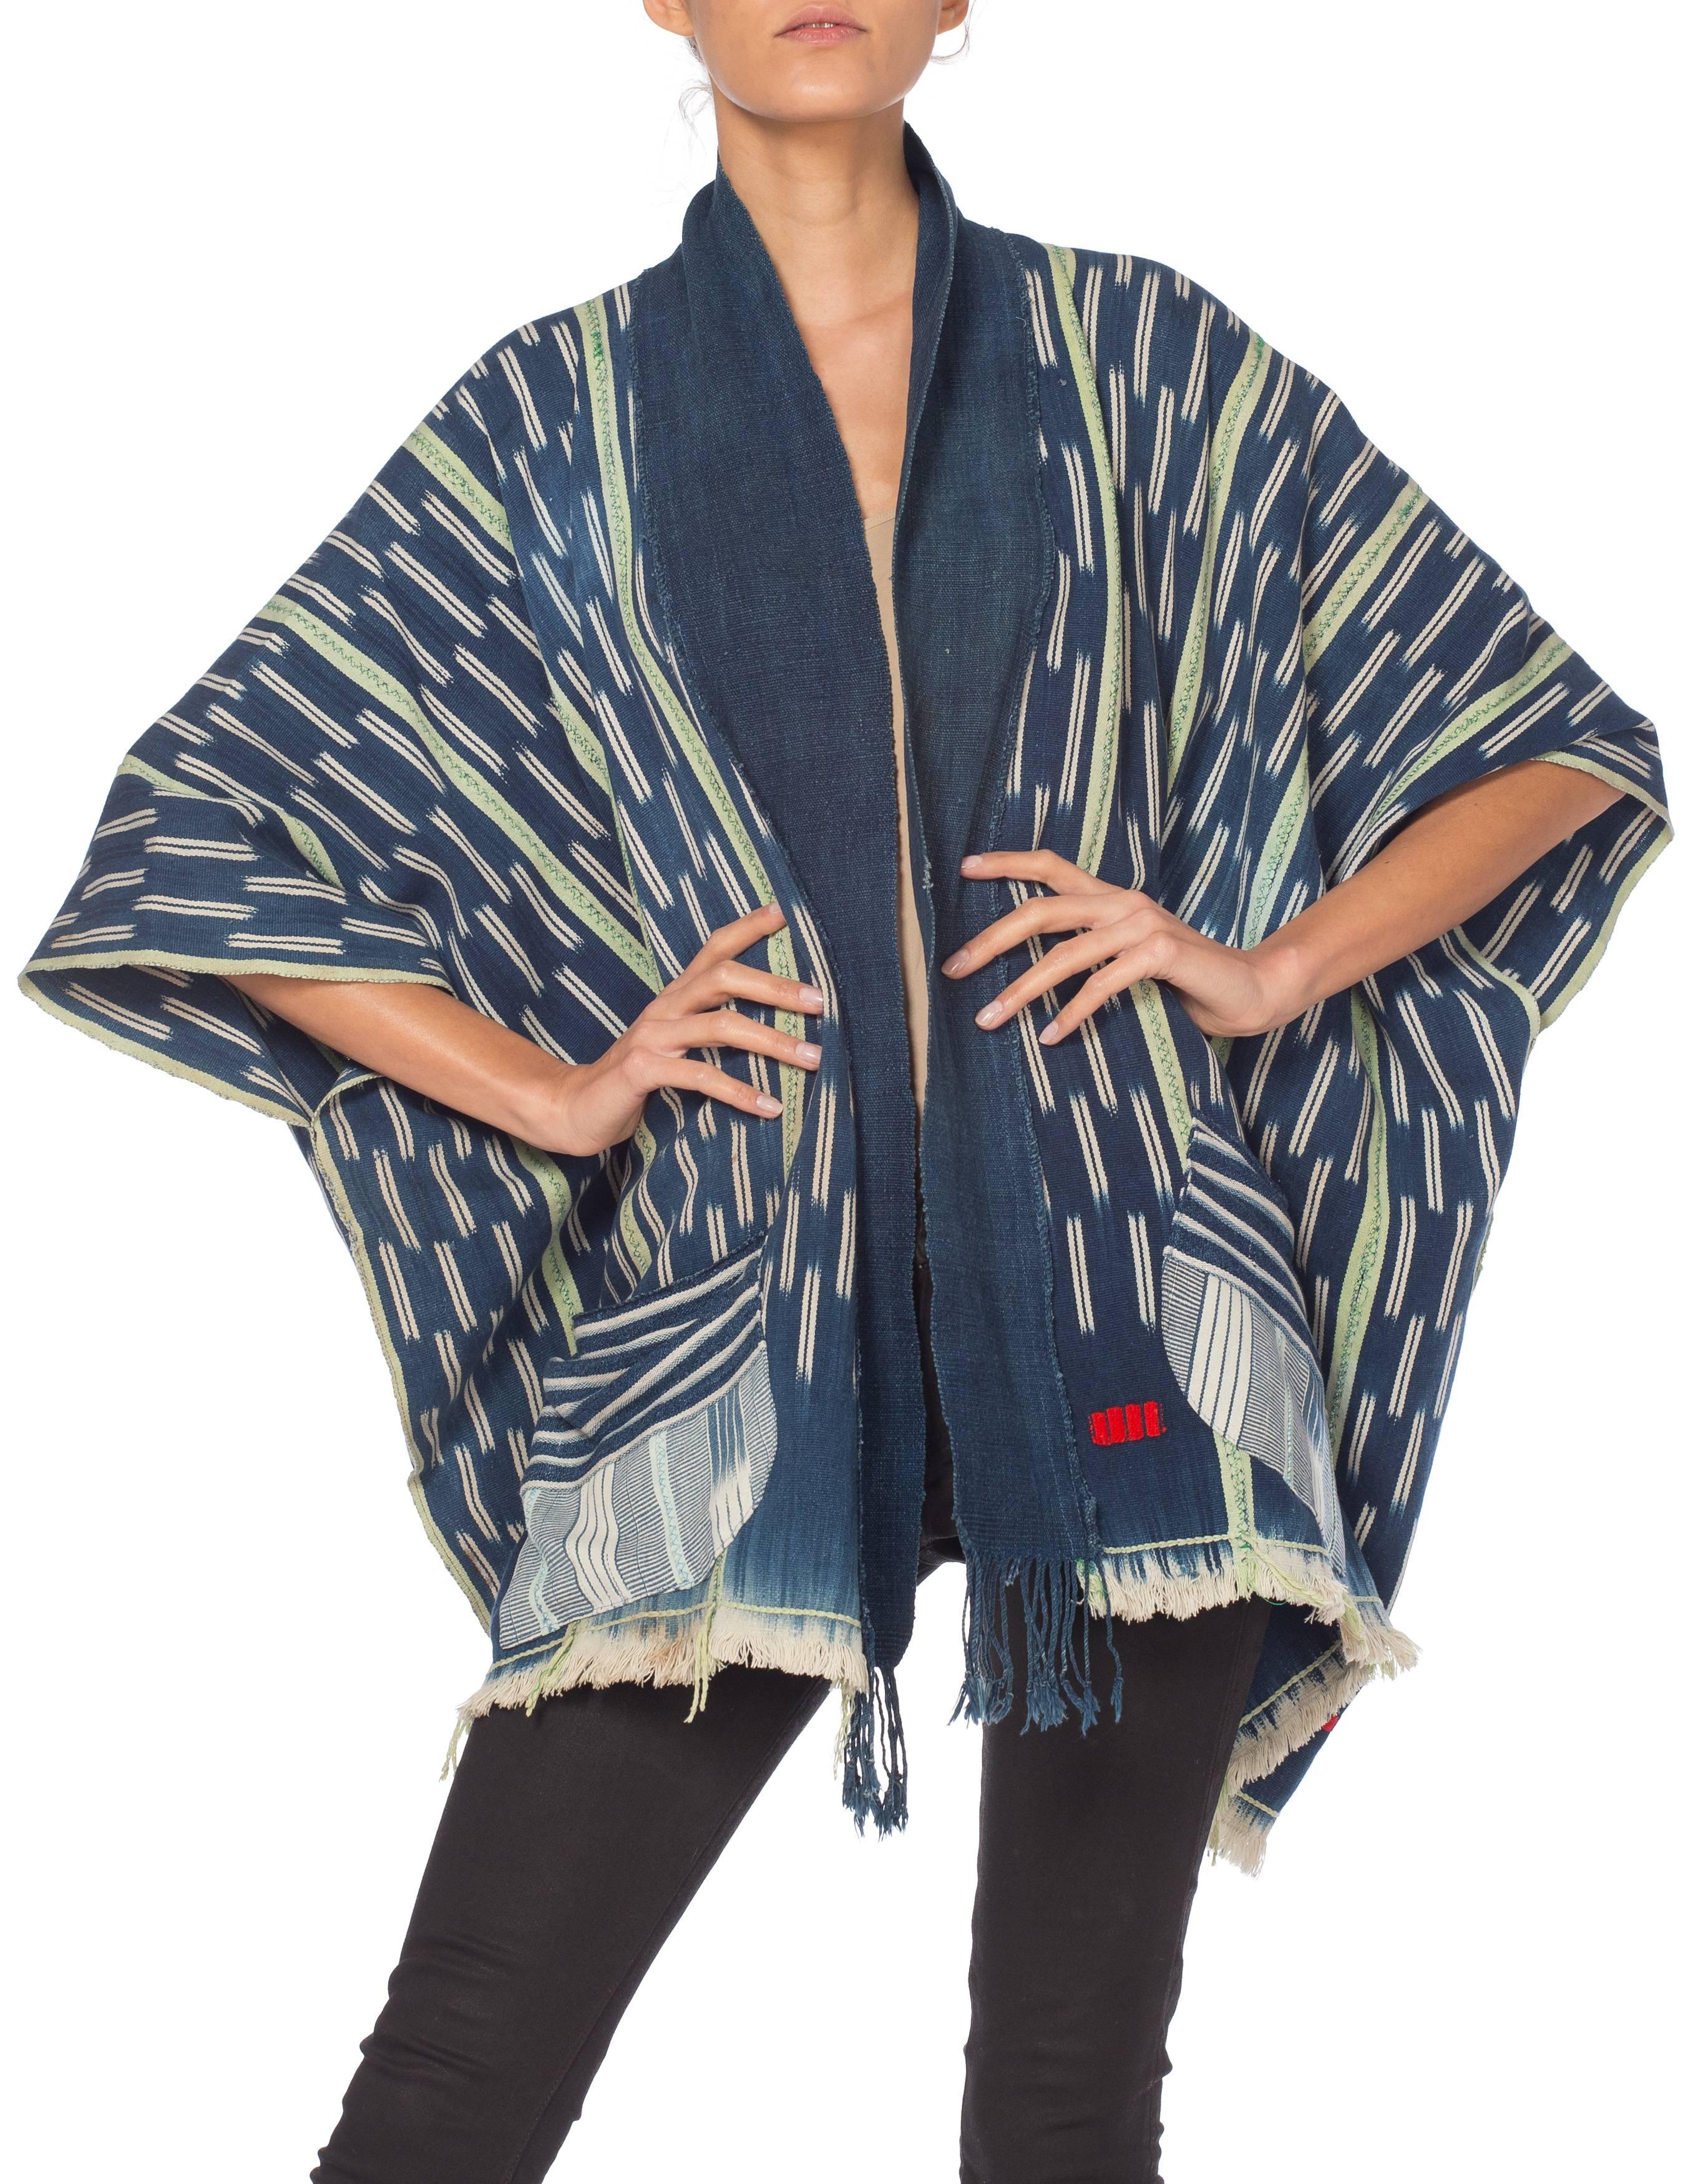 This piece is made from a hand woven and hand dyed 
West African cloth made by the Baule people of the Ivory Coast
The poncho shape of this garment honors the textile while making it wearabl MORPHEW COLLECTION Indigo Blue & Green Cotton Handwoven